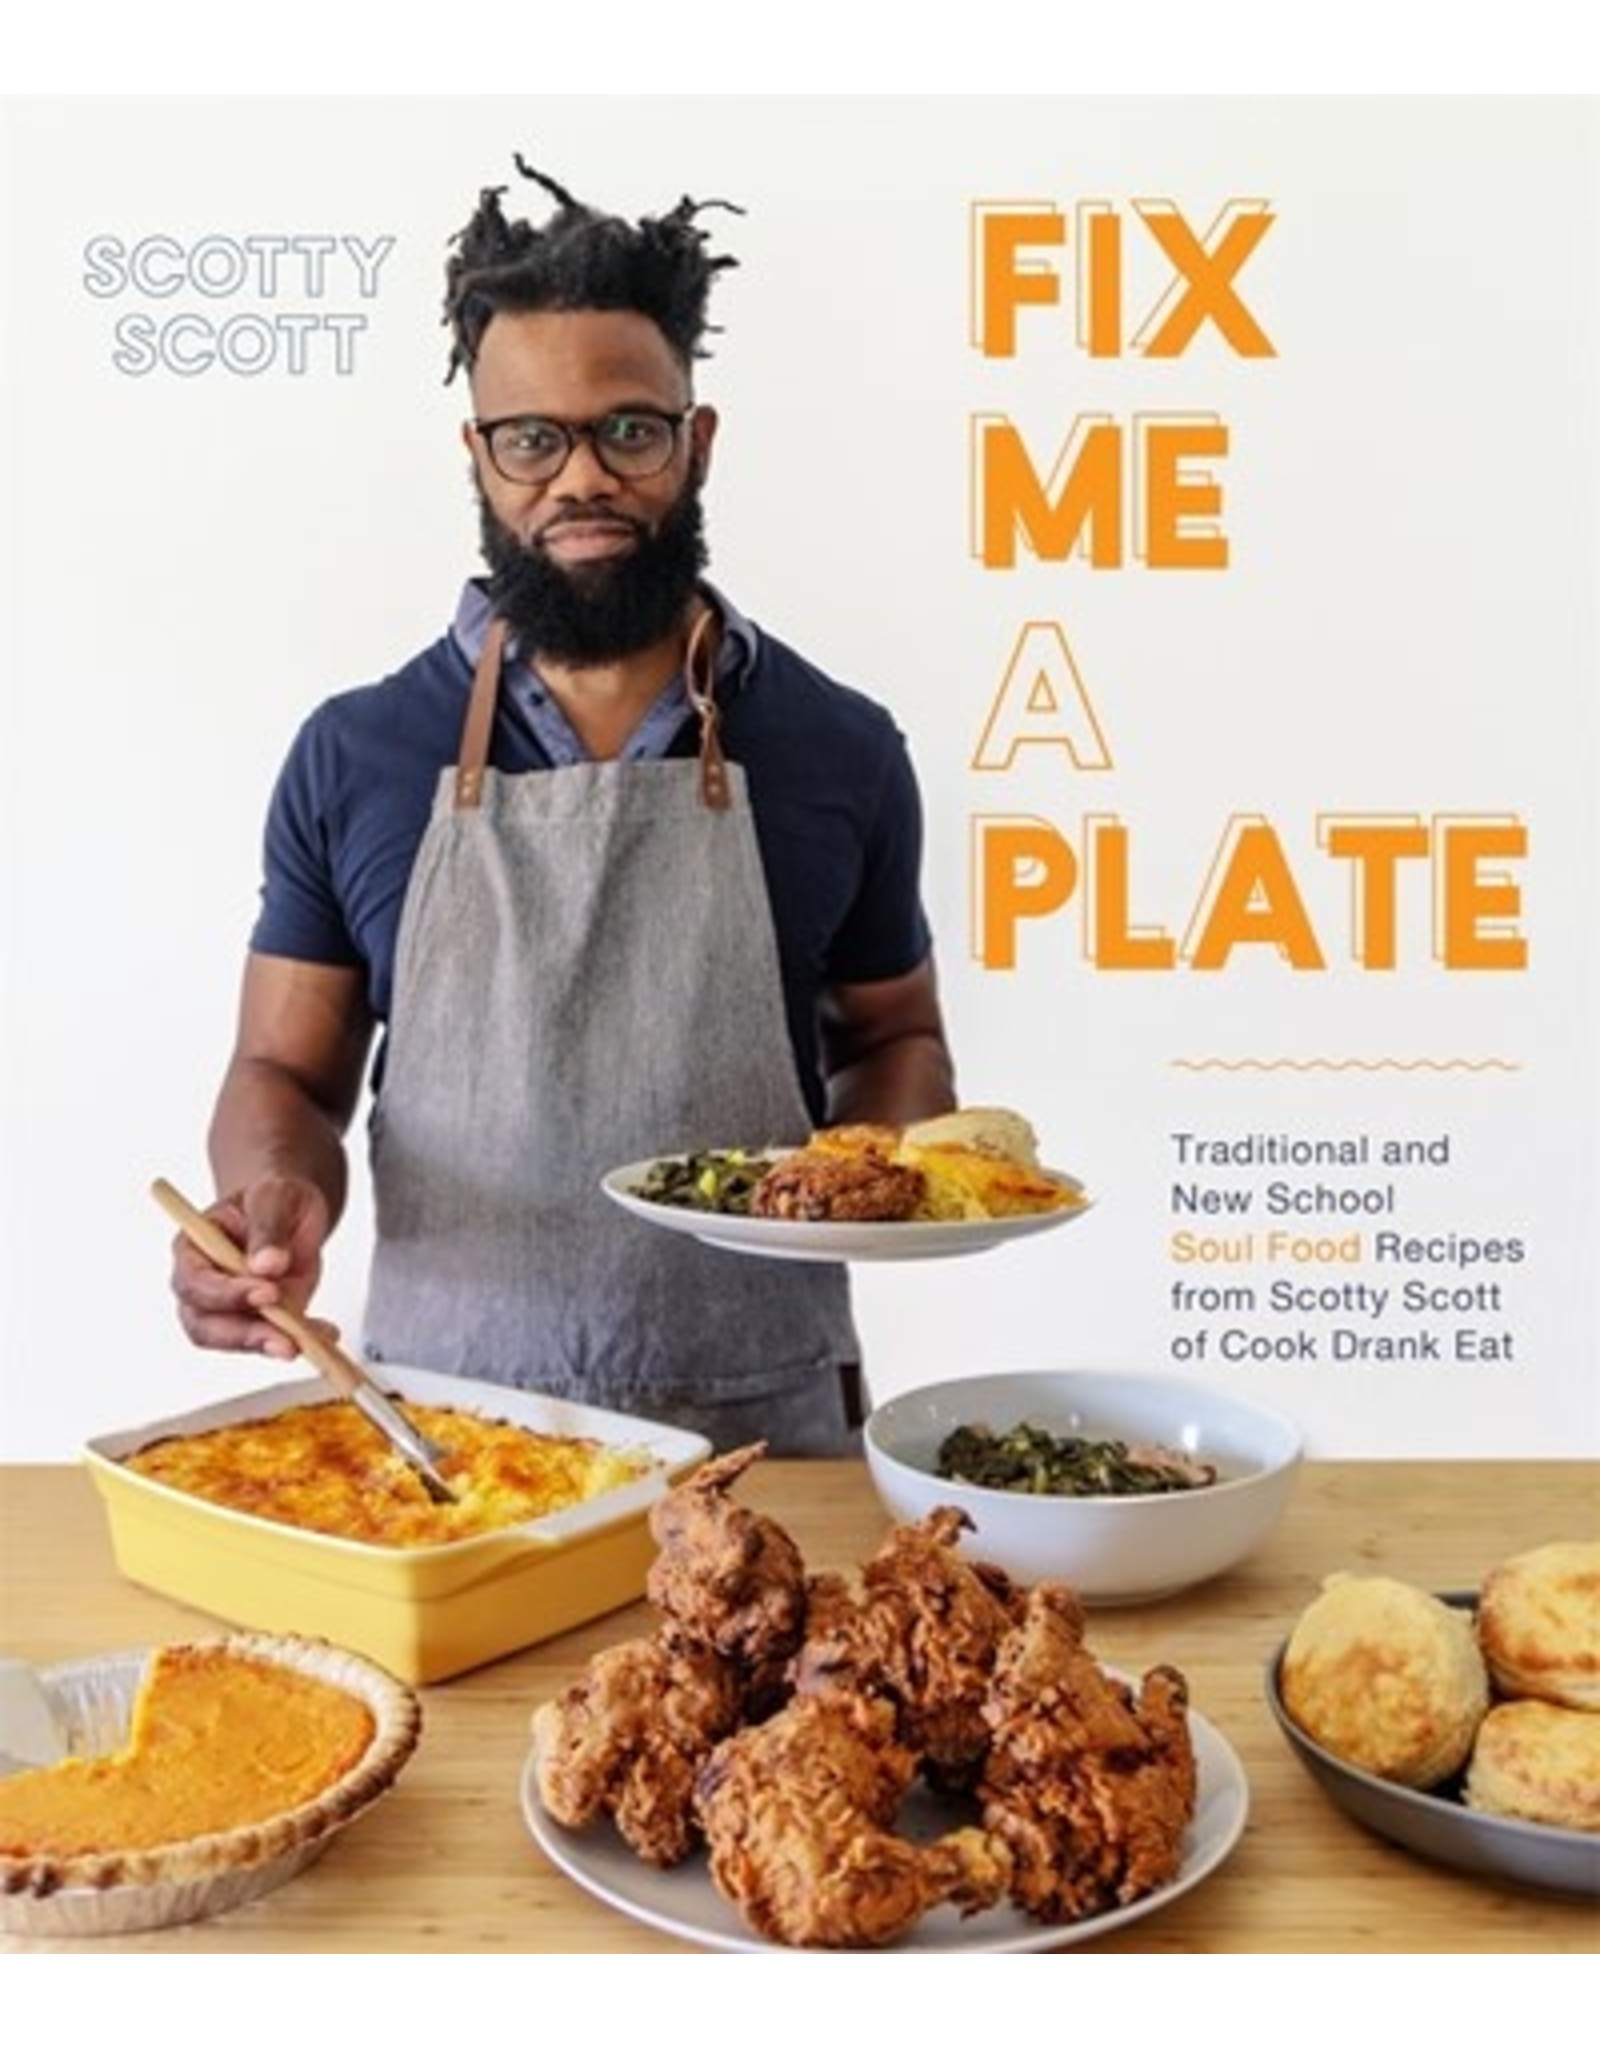 Books Fix Me A Plate : Traditional and New School Soul Food Recipes from Scotty Scott of Cook Drank Eat  by Scotty Scott (Virtual Event April 2nd)